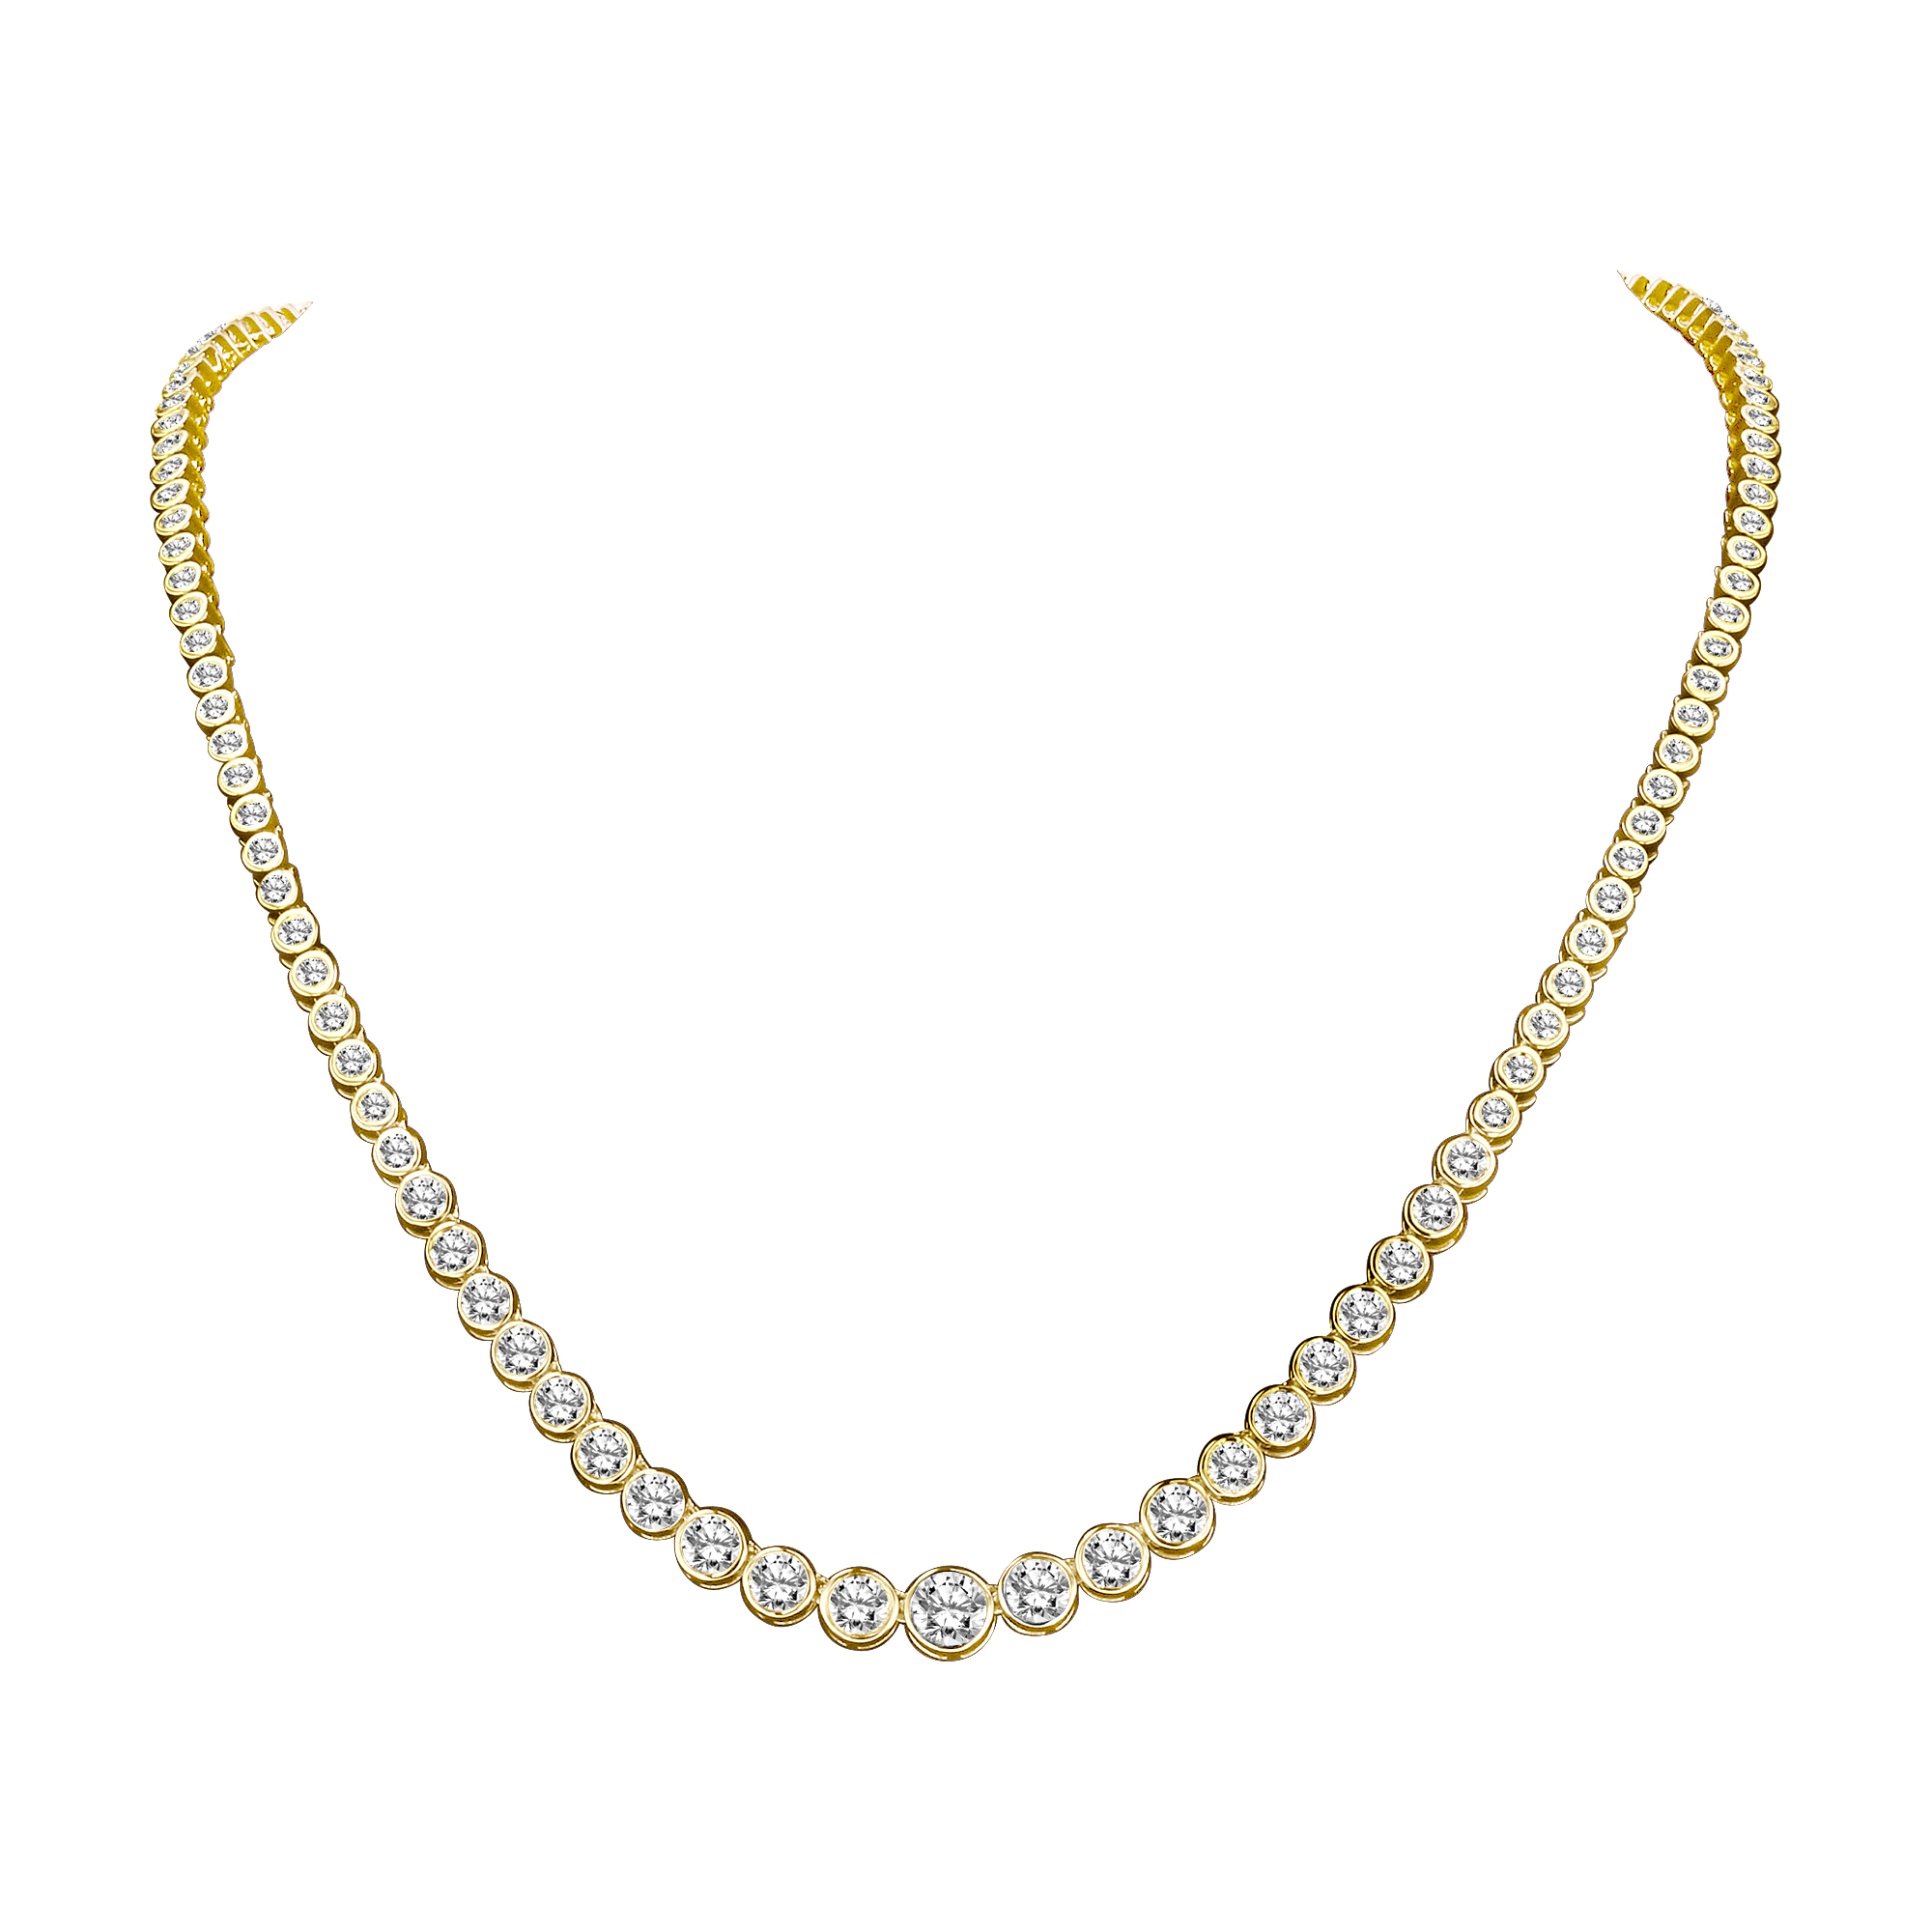 View 7.00ctw 17 inch Graduated Diamond Bezel Set Tennis Necklace in 14k Yellow Gold